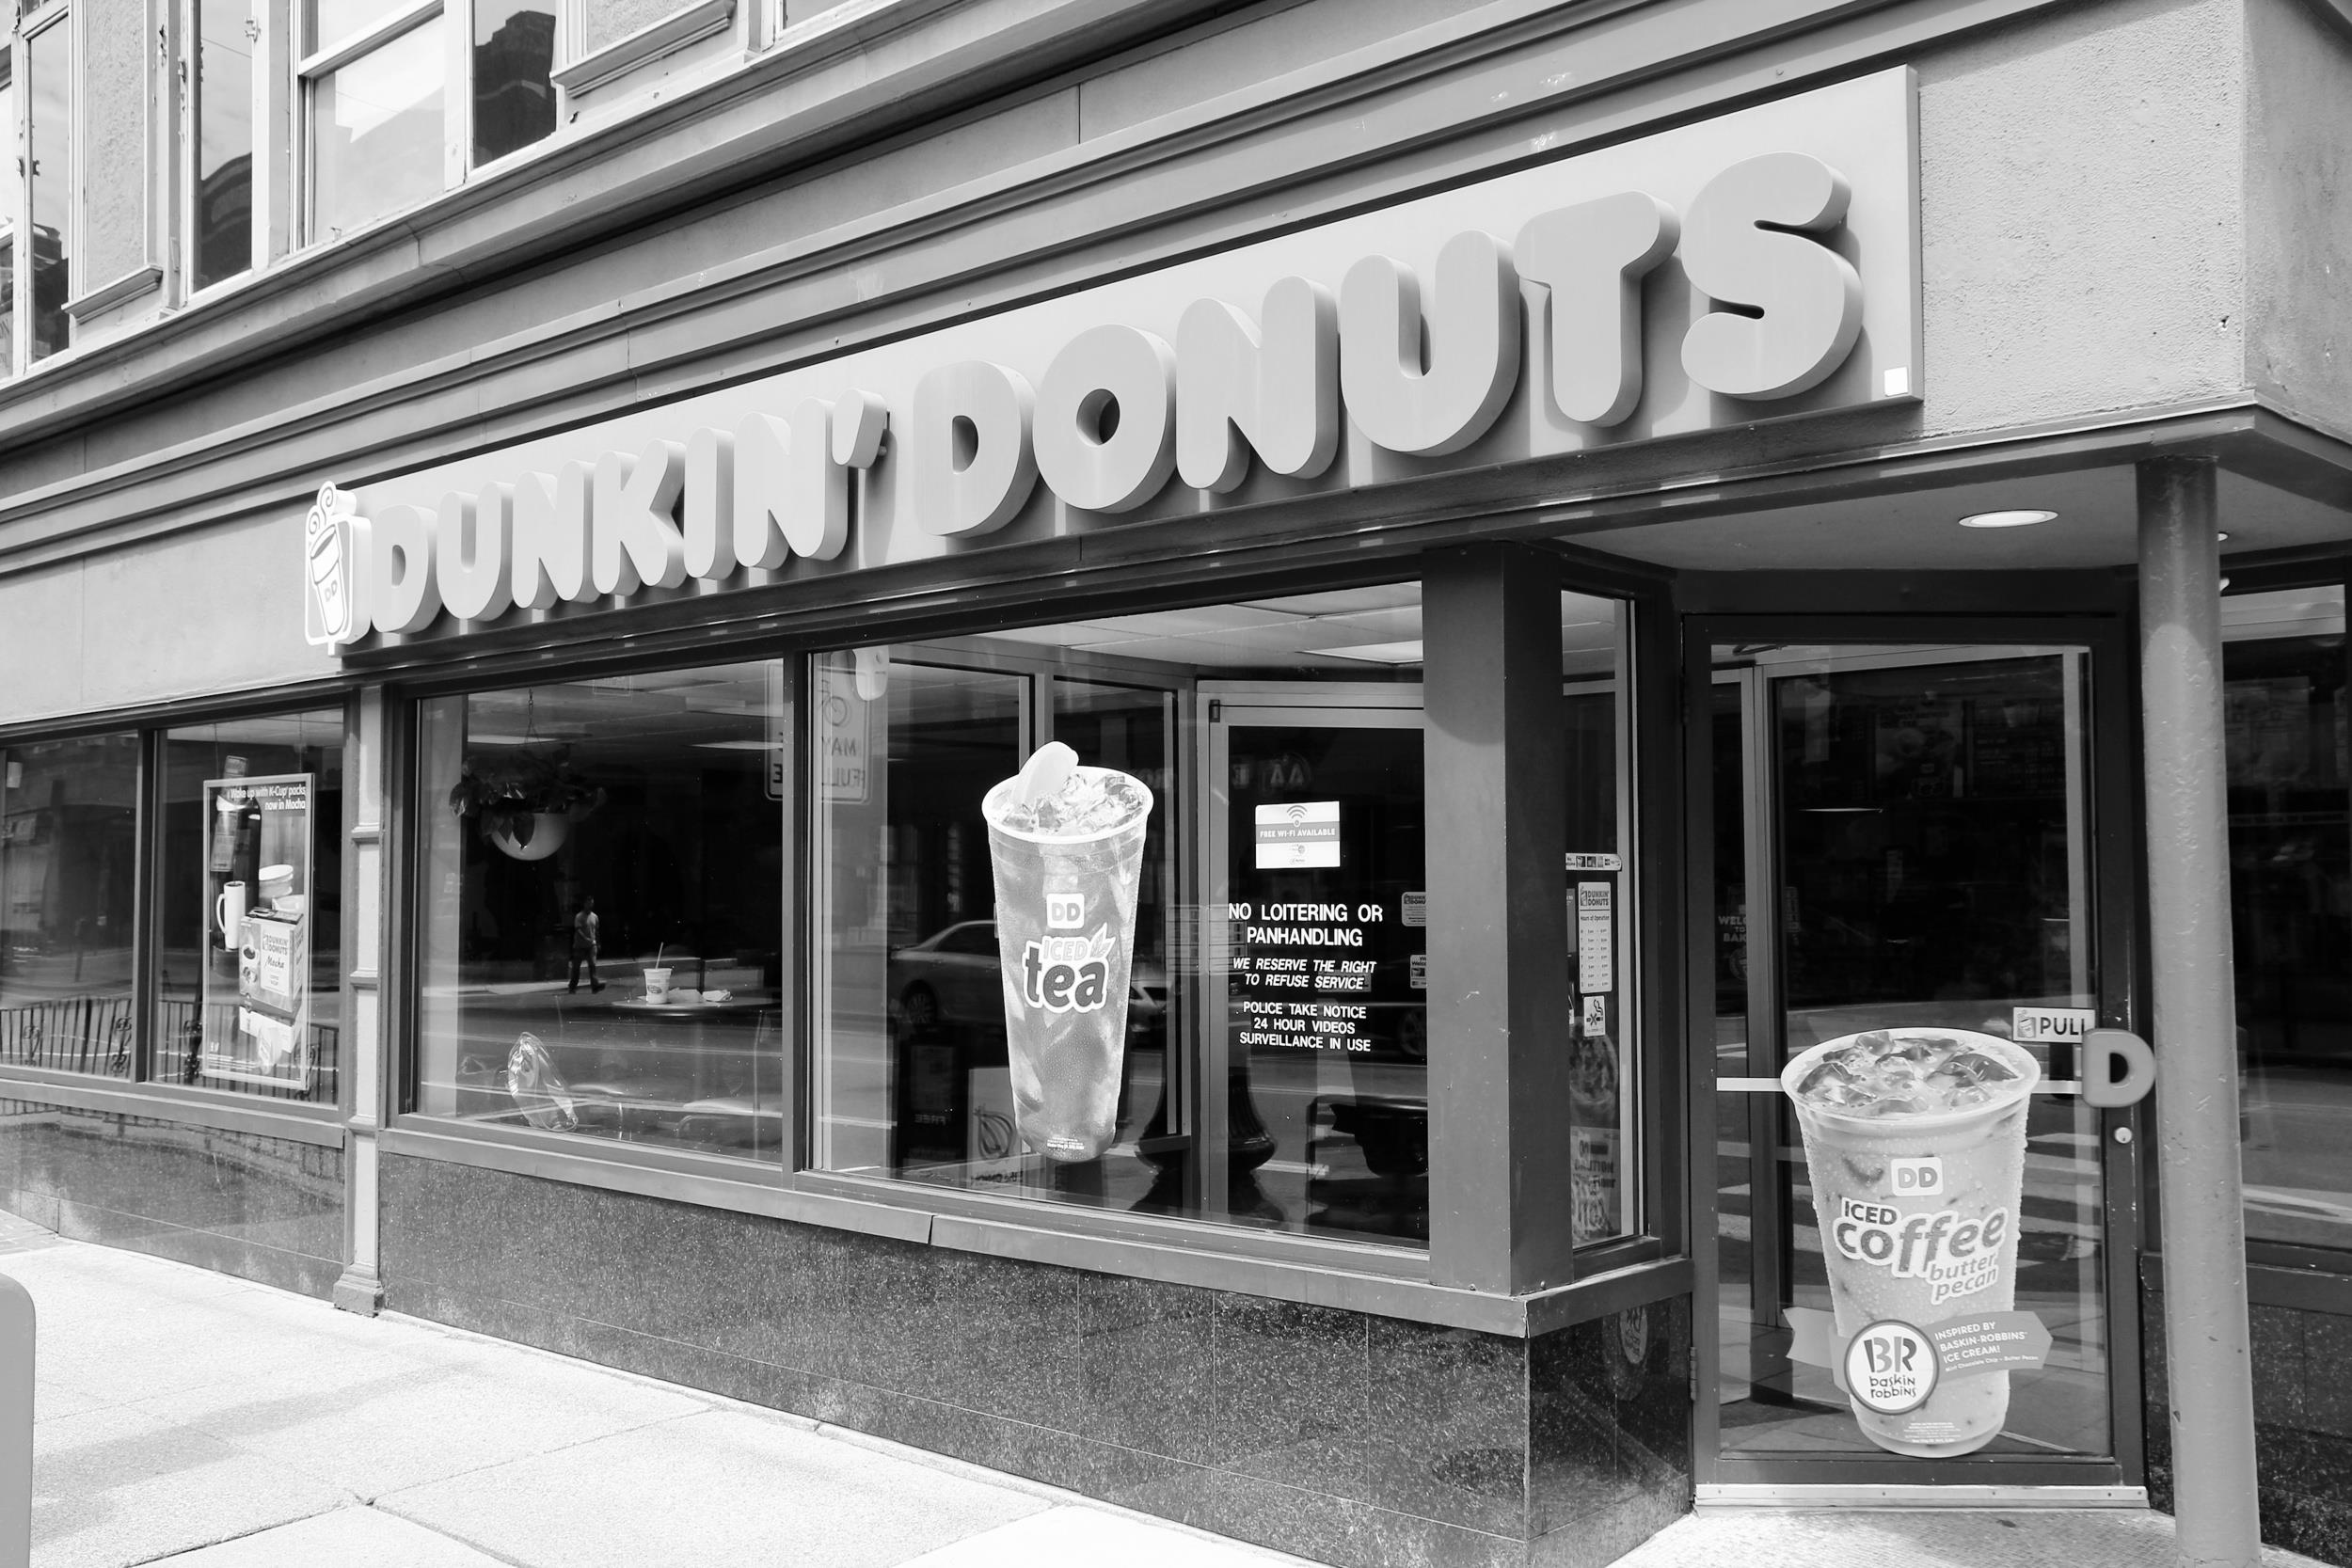 <p>Now that we’ve covered Dunkin’ Donuts vs. Dunkin’, did you know it also previously had another name? In 1948, when William Rosenberg first opened a shop that sold donuts for five cents and cups of coffee for 10 cents, he called it “Open Kettle.” Two years later, after consulting with his executives, Rosenberg changed the name to Dunkin’ Donuts, with a goal to “make and serve the freshest, most delicious coffee and donuts quickly and courteously in modern, well-merchandised stores.”</p><p><a href='https://www.msn.com/en-us/community/channel/vid-cj9pqbr0vn9in2b6ddcd8sfgpfq6x6utp44fssrv6mc2gtybw0us'>Follow us on MSN to see more of our exclusive lifestyle content.</a></p>